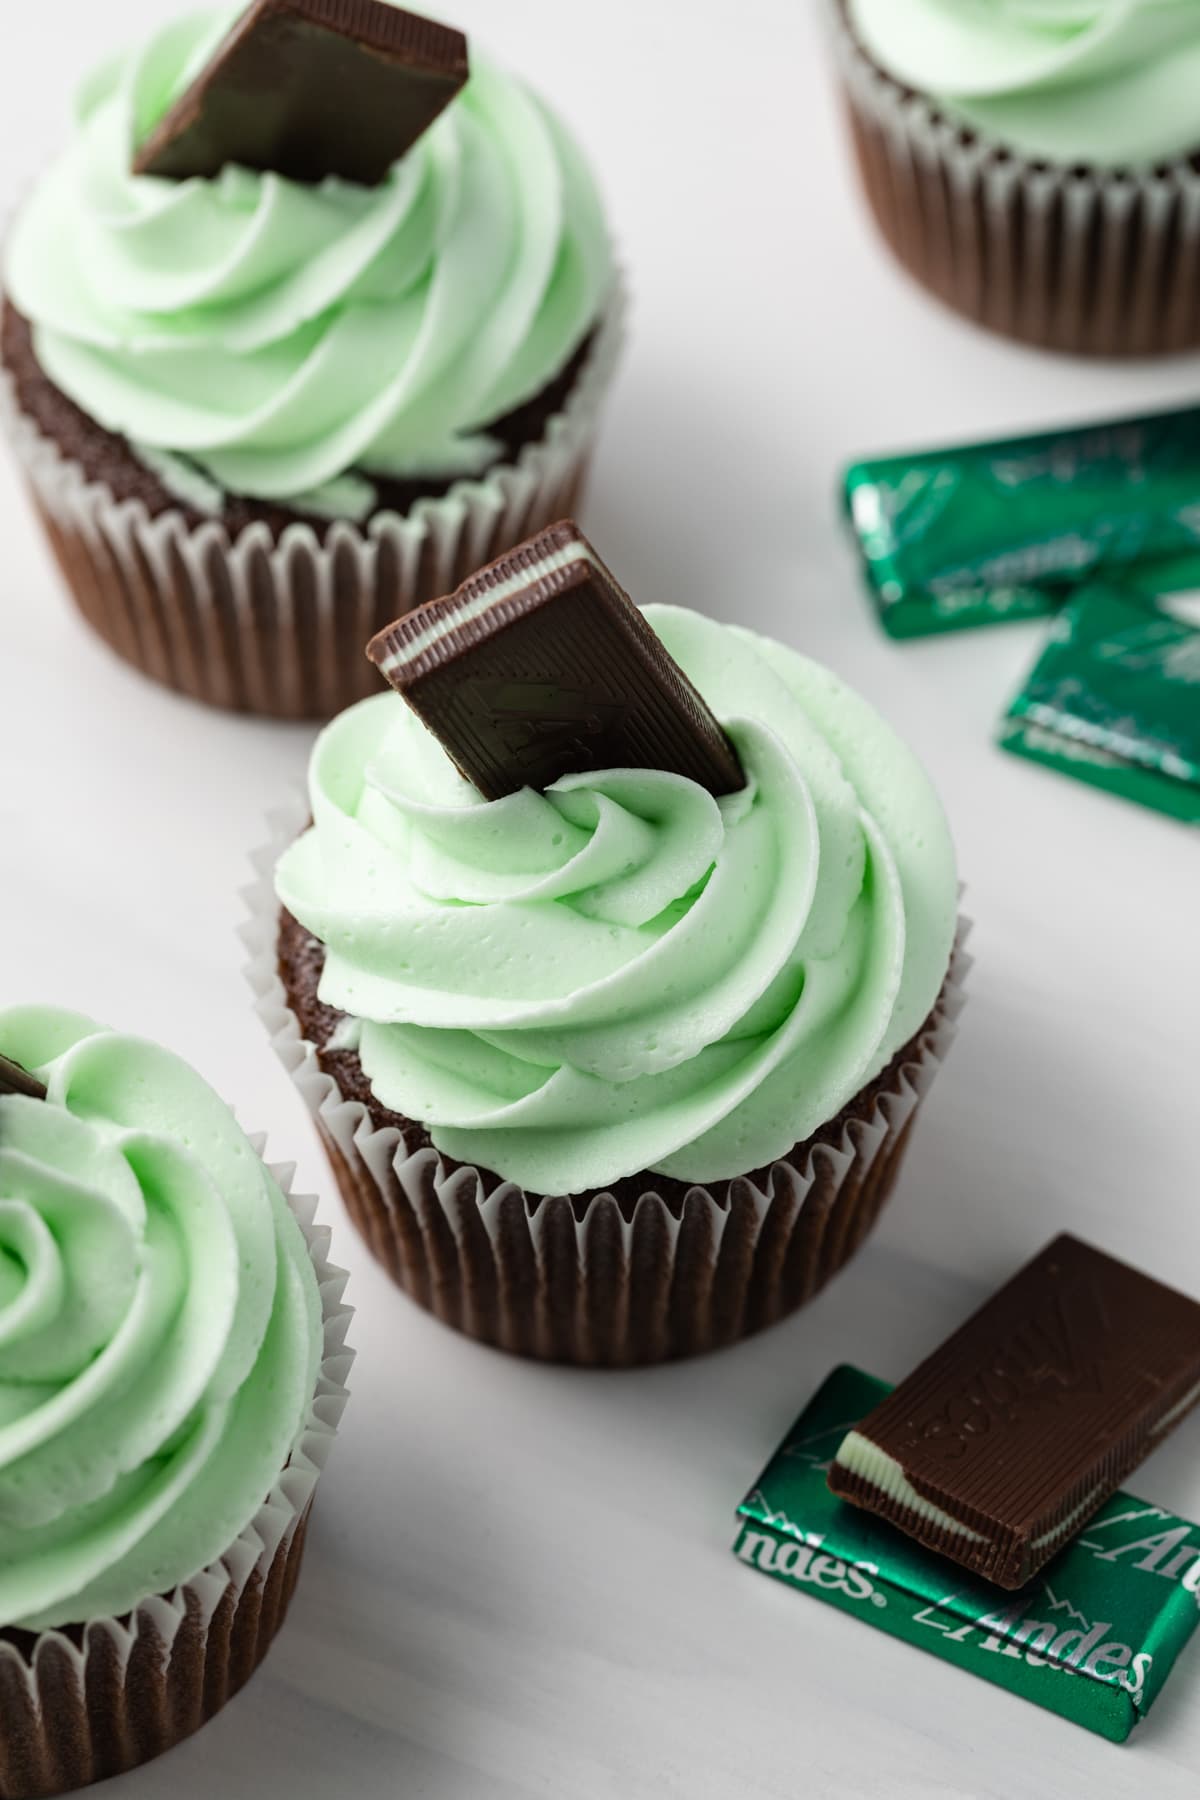 Andes mint cupcakes on tabletop.